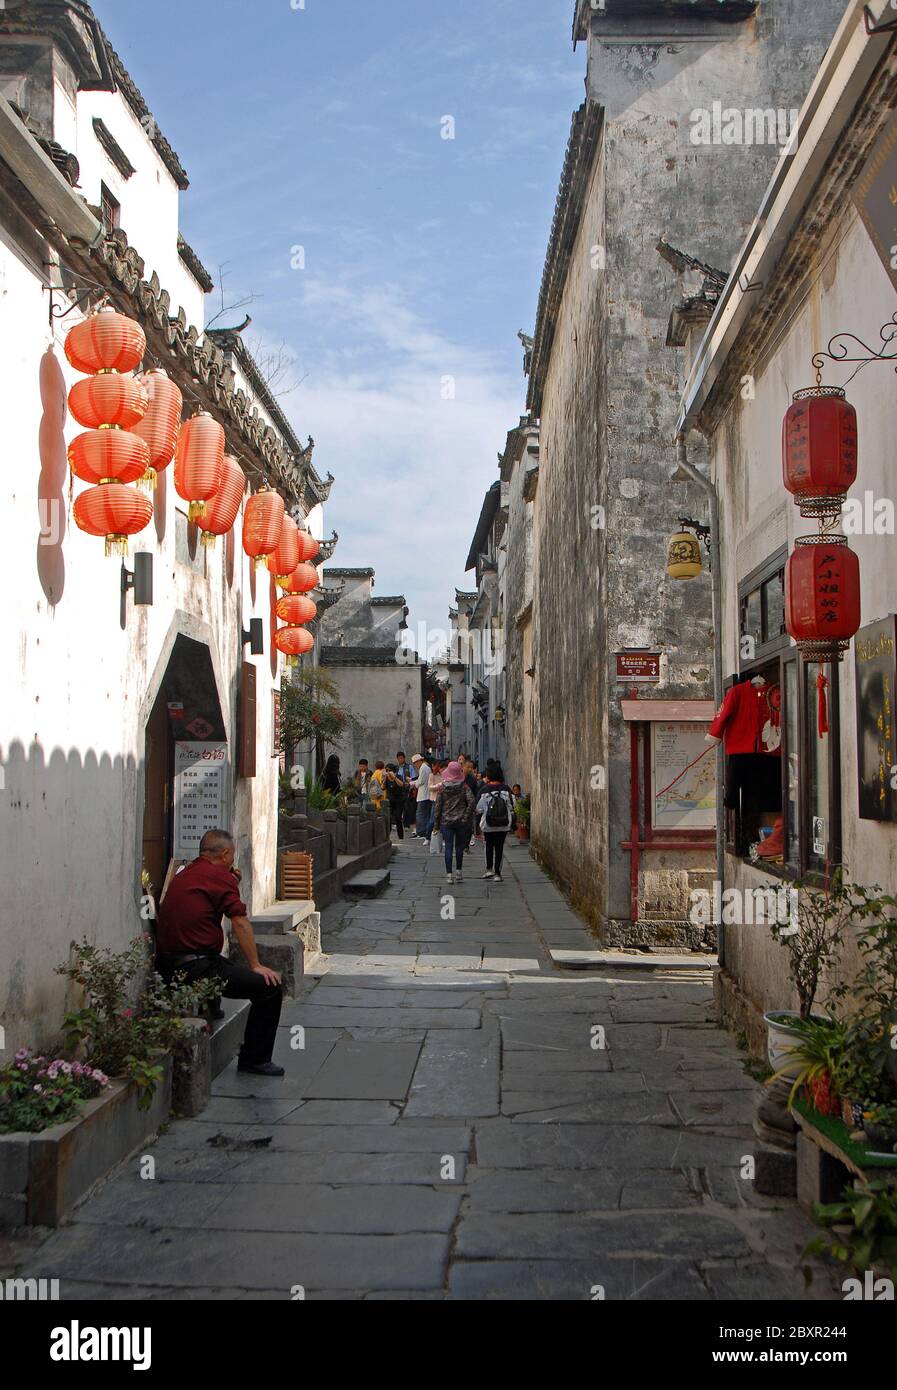 Xidi Ancient Town in Anhui Province, China. Old town of Xidi with historical buildings, cobbled street and red lanterns. Stock Photo